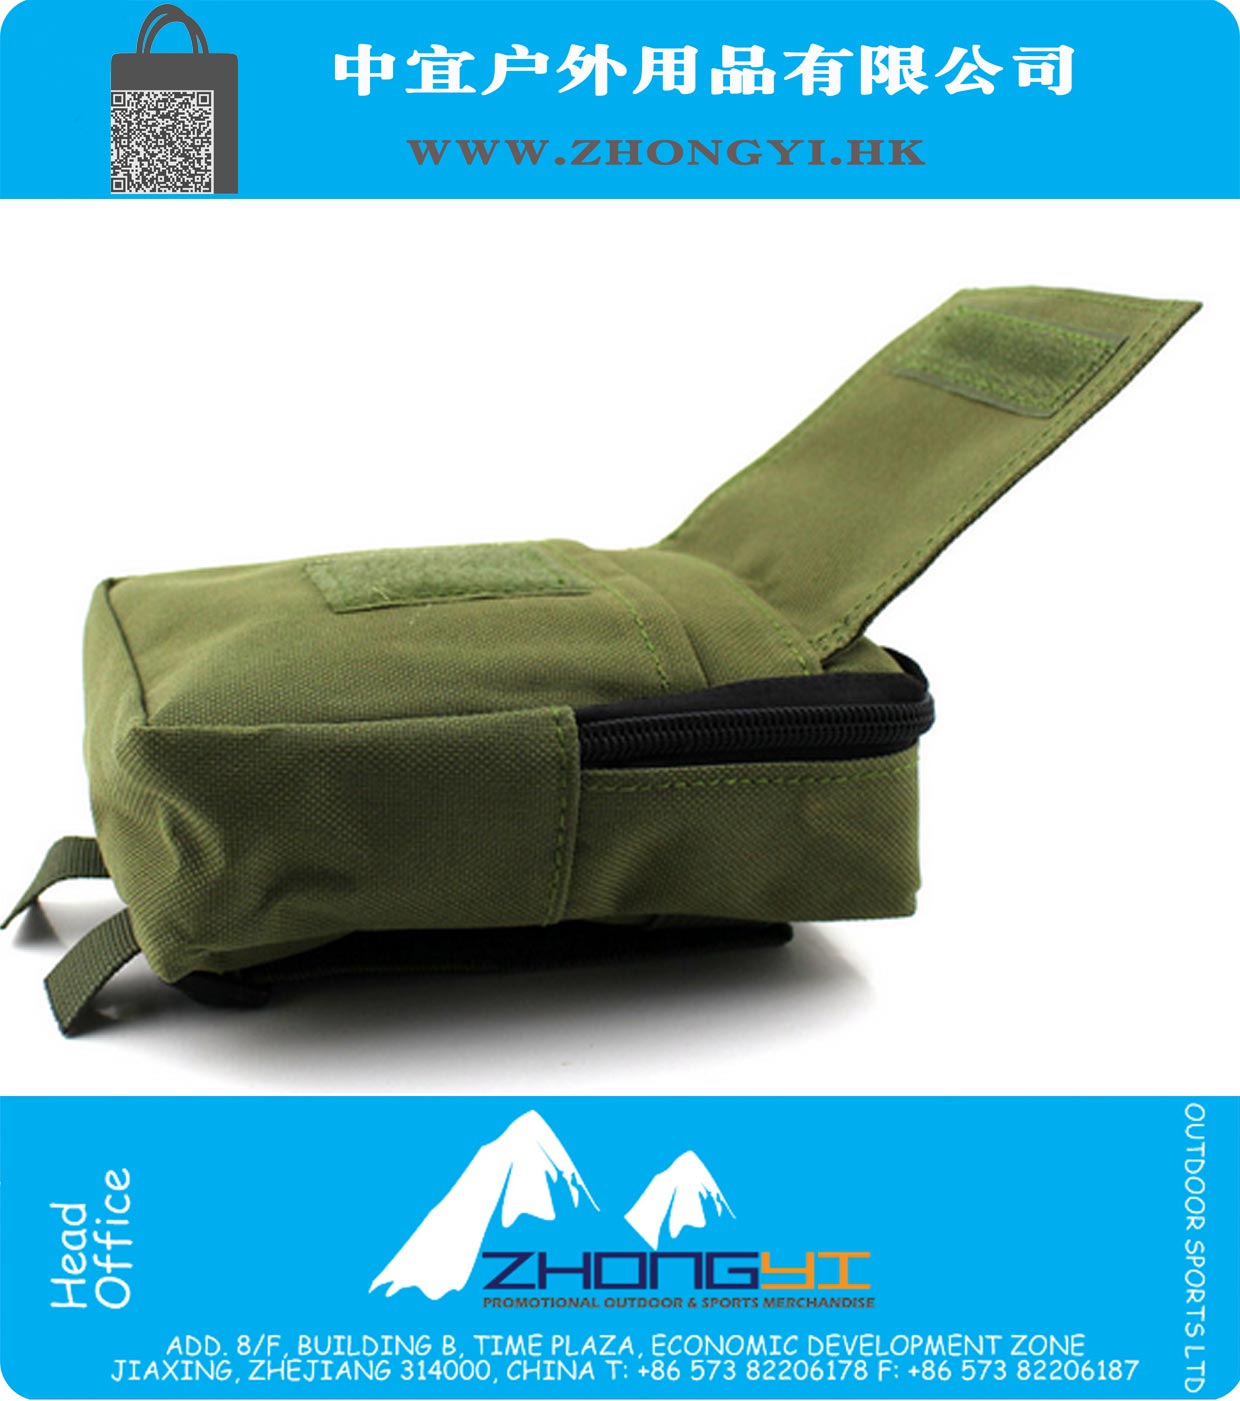 Utility Mess Bag Outdoor Survival Tools Pocket